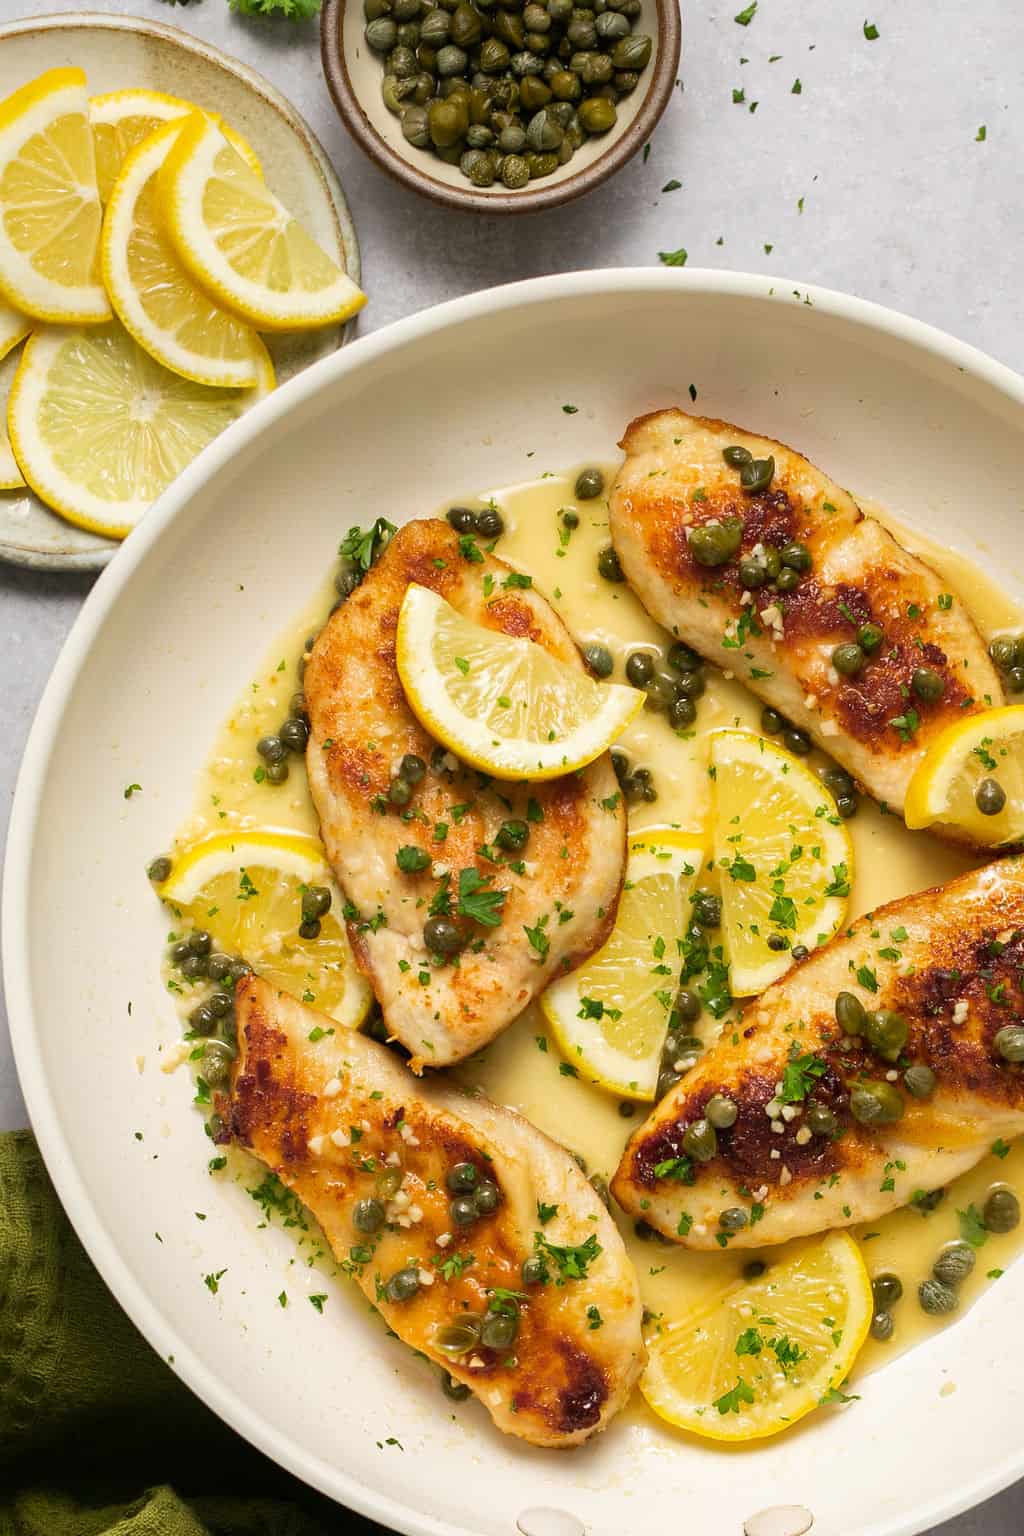 Gluten free chicken piccata on a plate with lemon slices and capers.